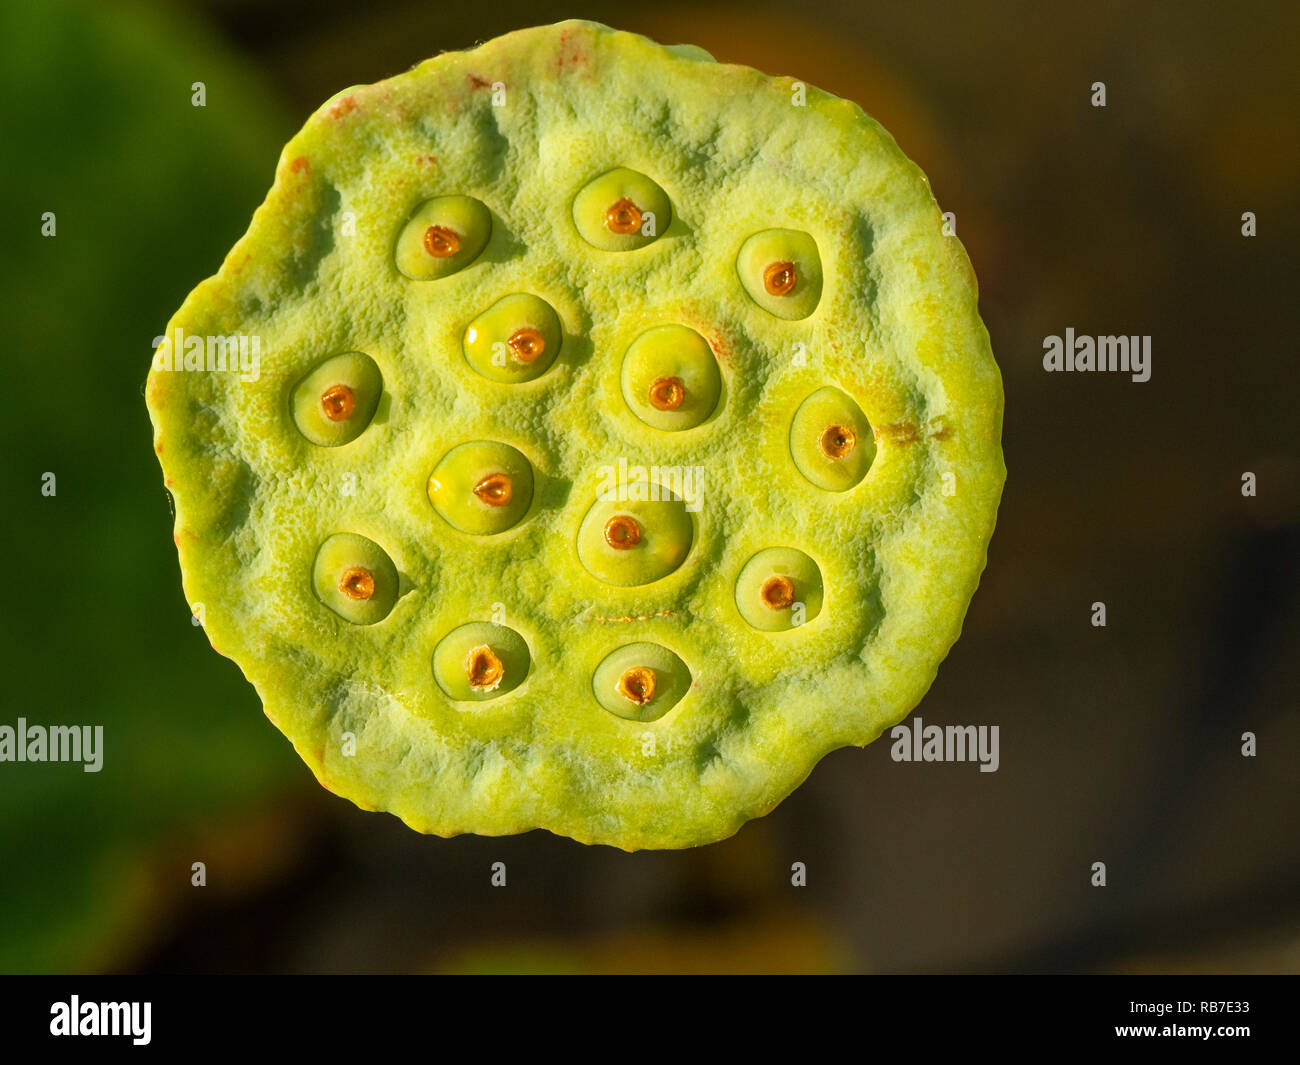 Close up of a Lotus or Lotos fruit body Stock Photo